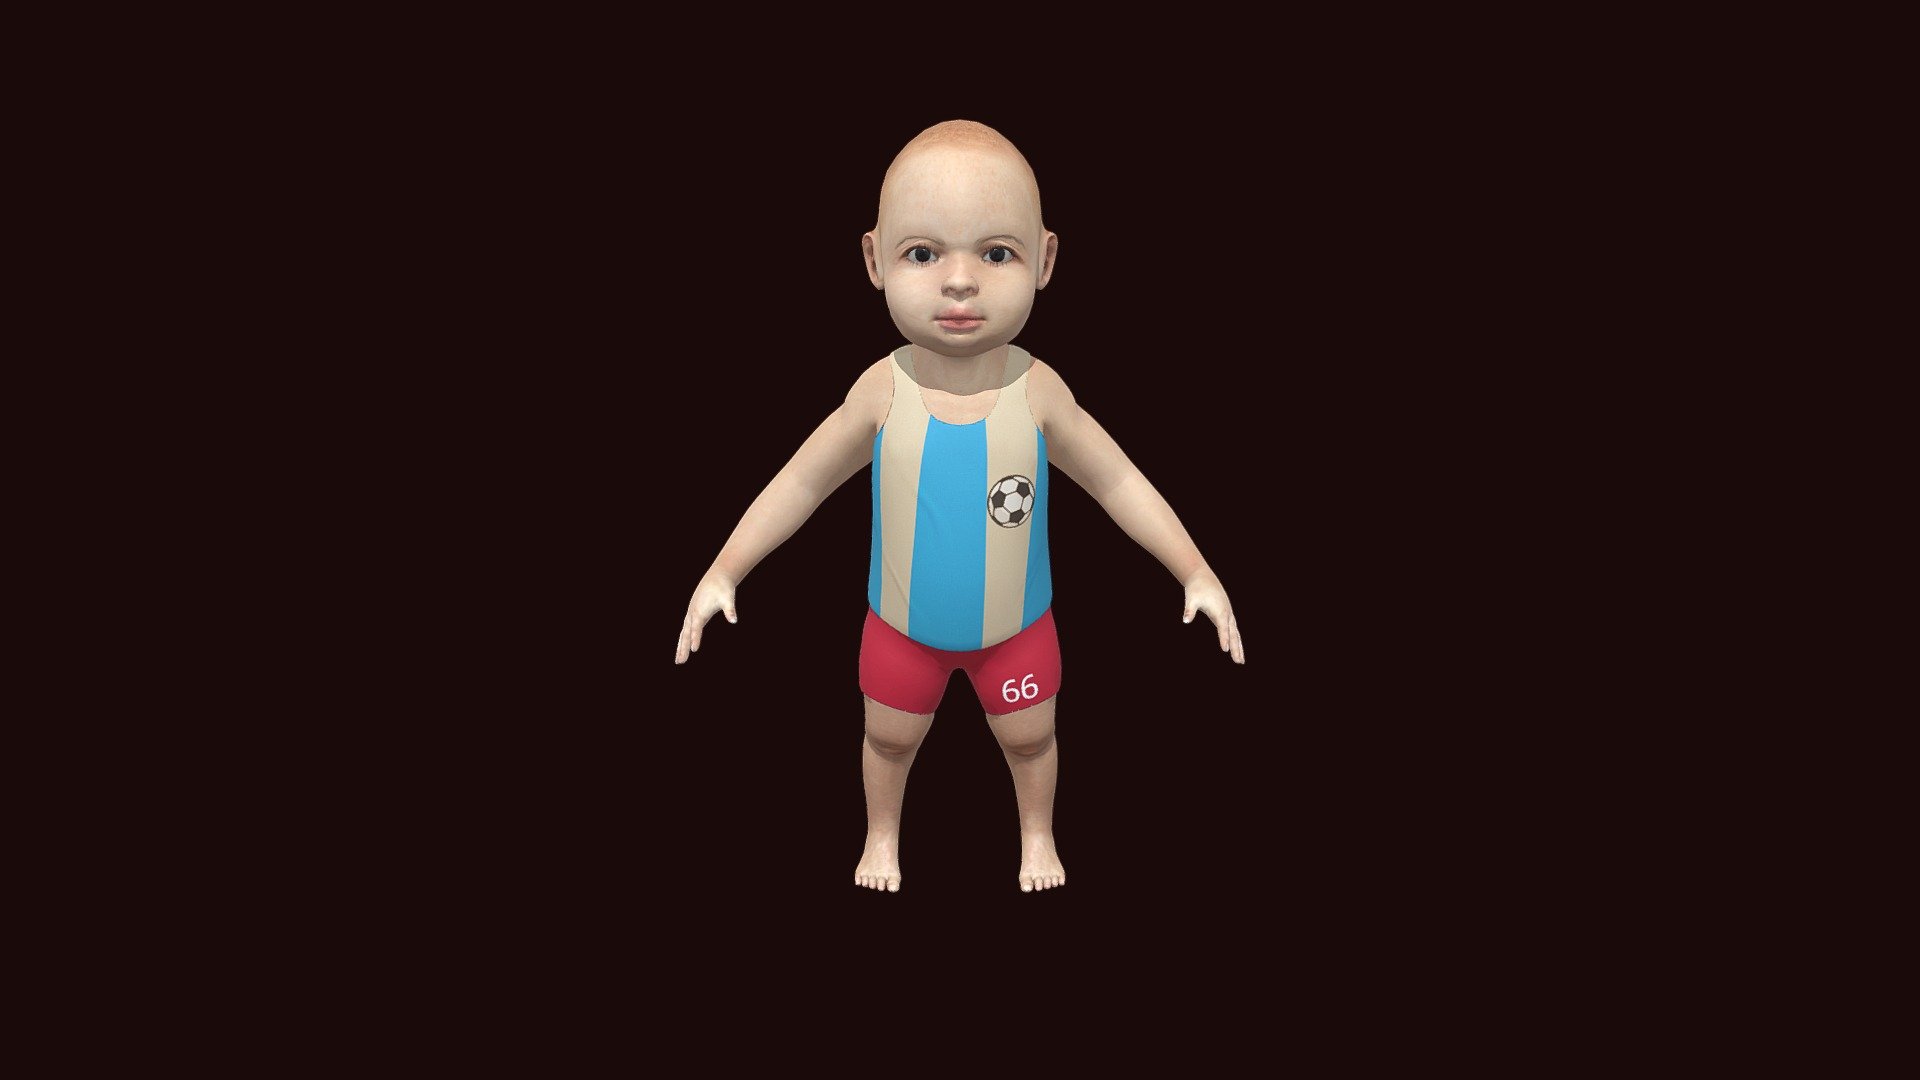 Baby boy 3d modeling ,cloth modelunwrapped and textured 
qaud geometry polygone 3d model